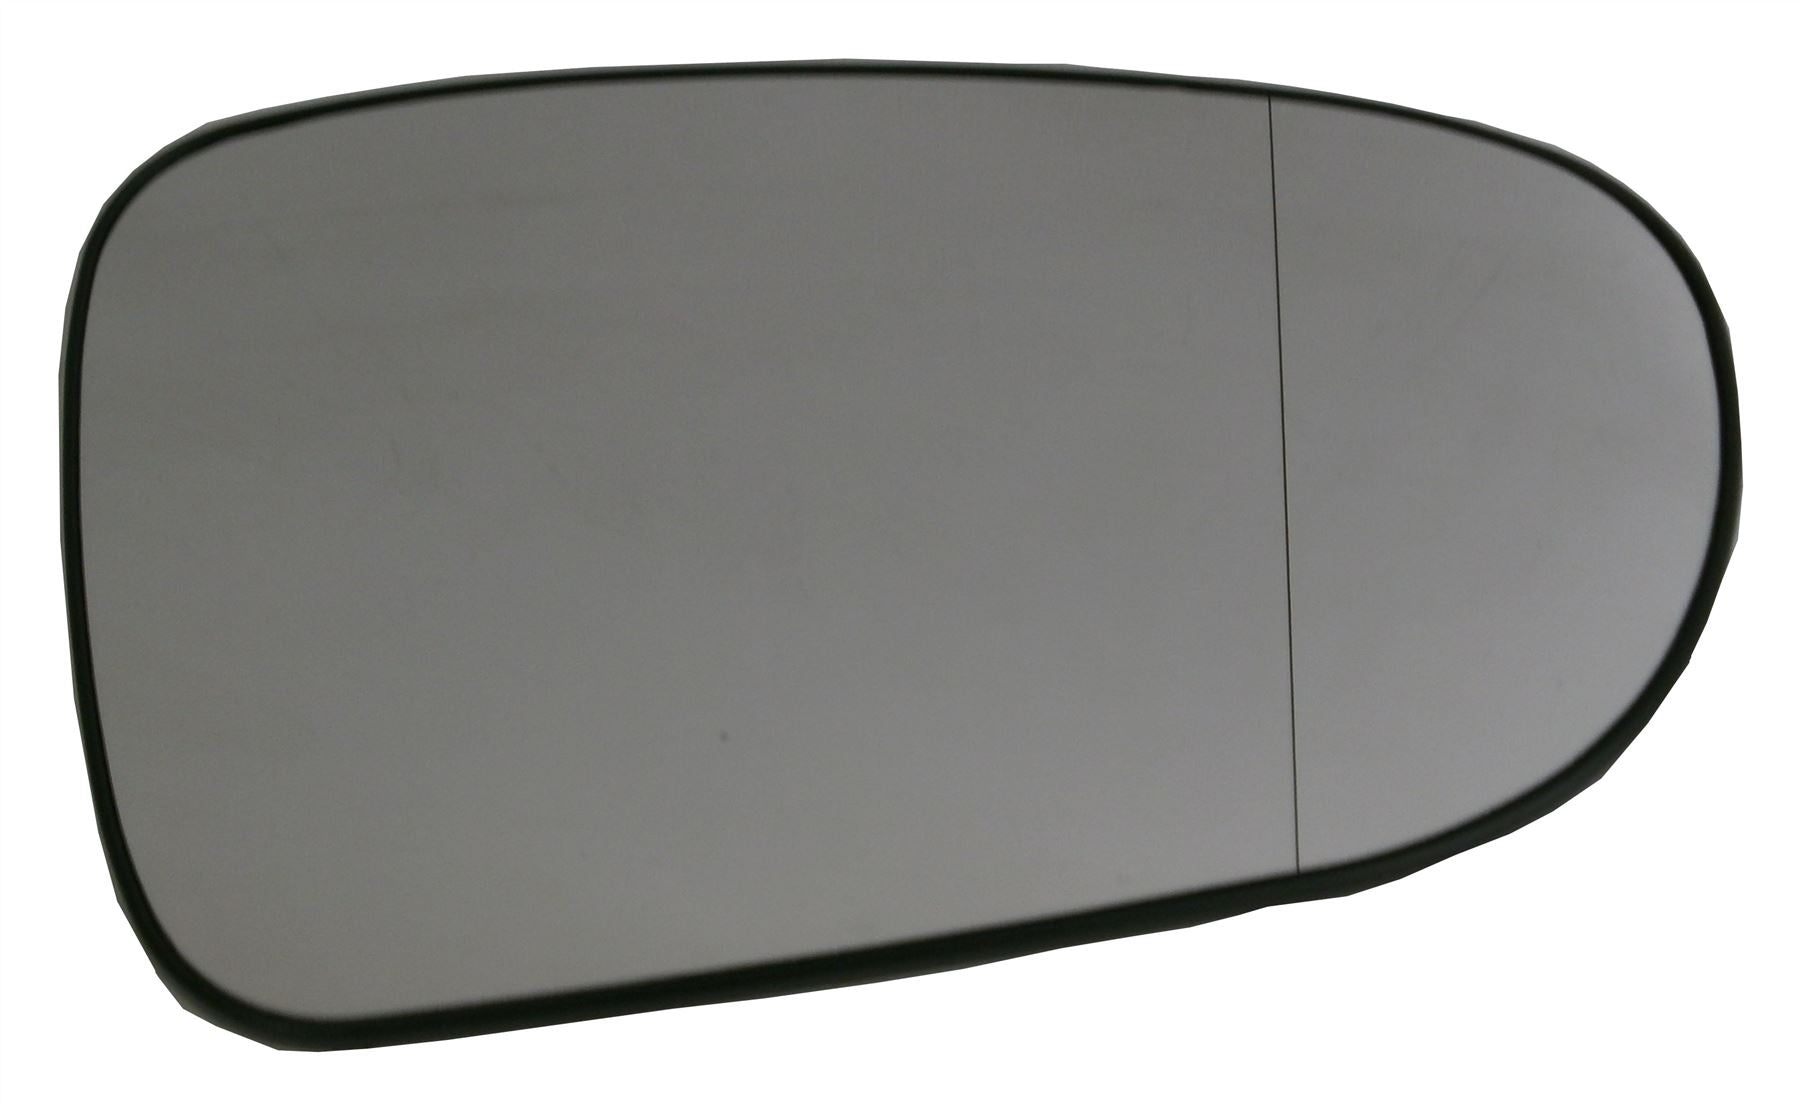 MCW Metrocab TTT Taxi 1995-8/2000 Non-Heated Convex Mirror Glass Drivers Side O/S